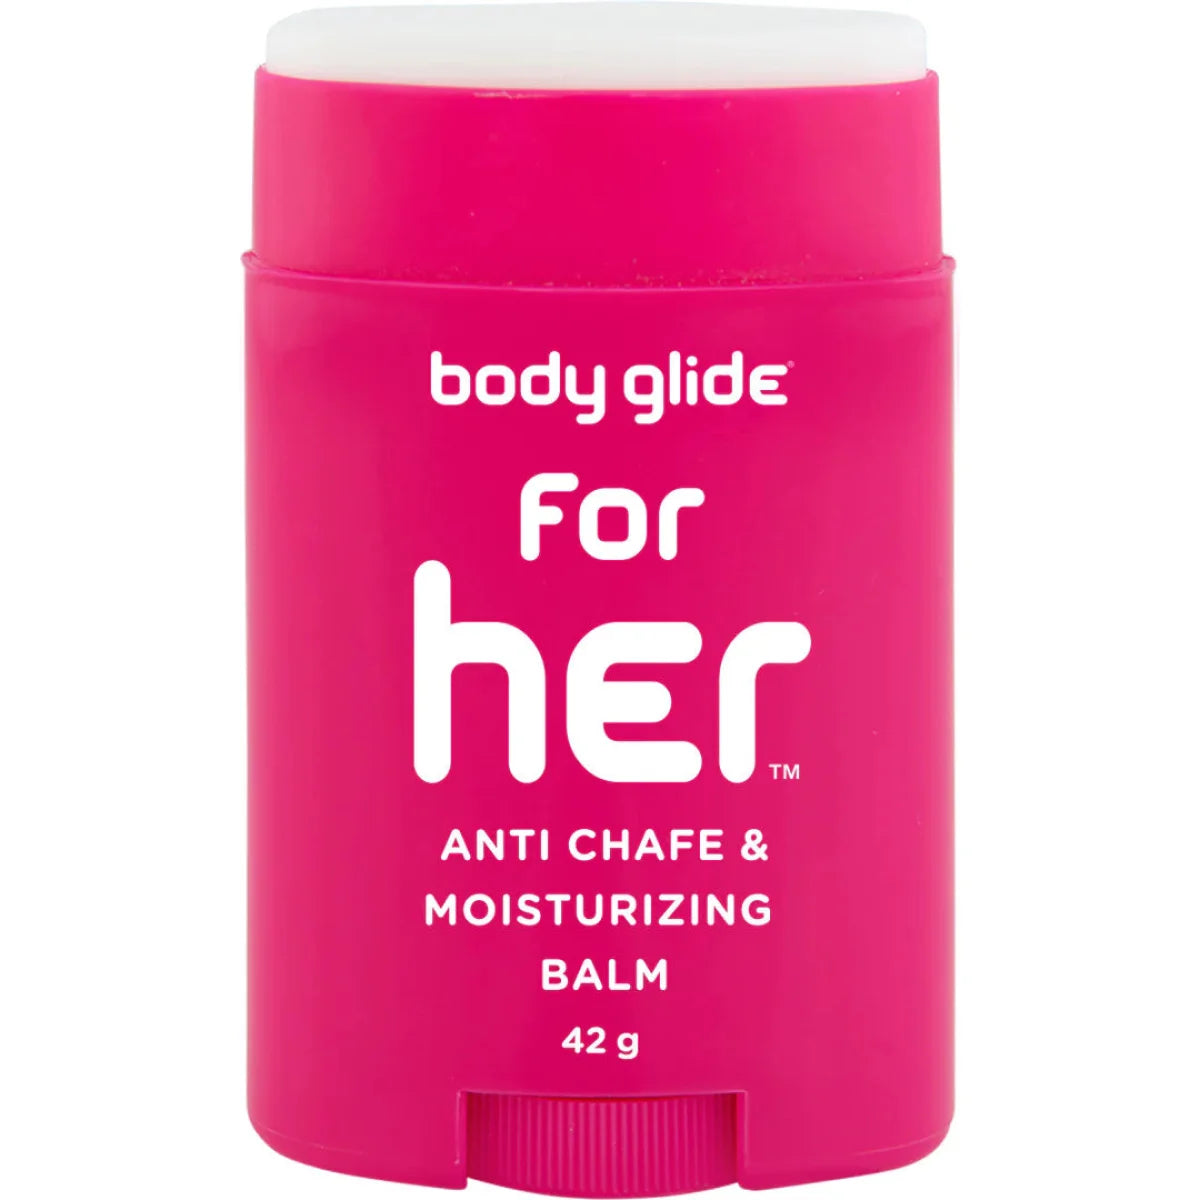 2Pure Body Glide For Her Anti Chafe and Moisturising Balm